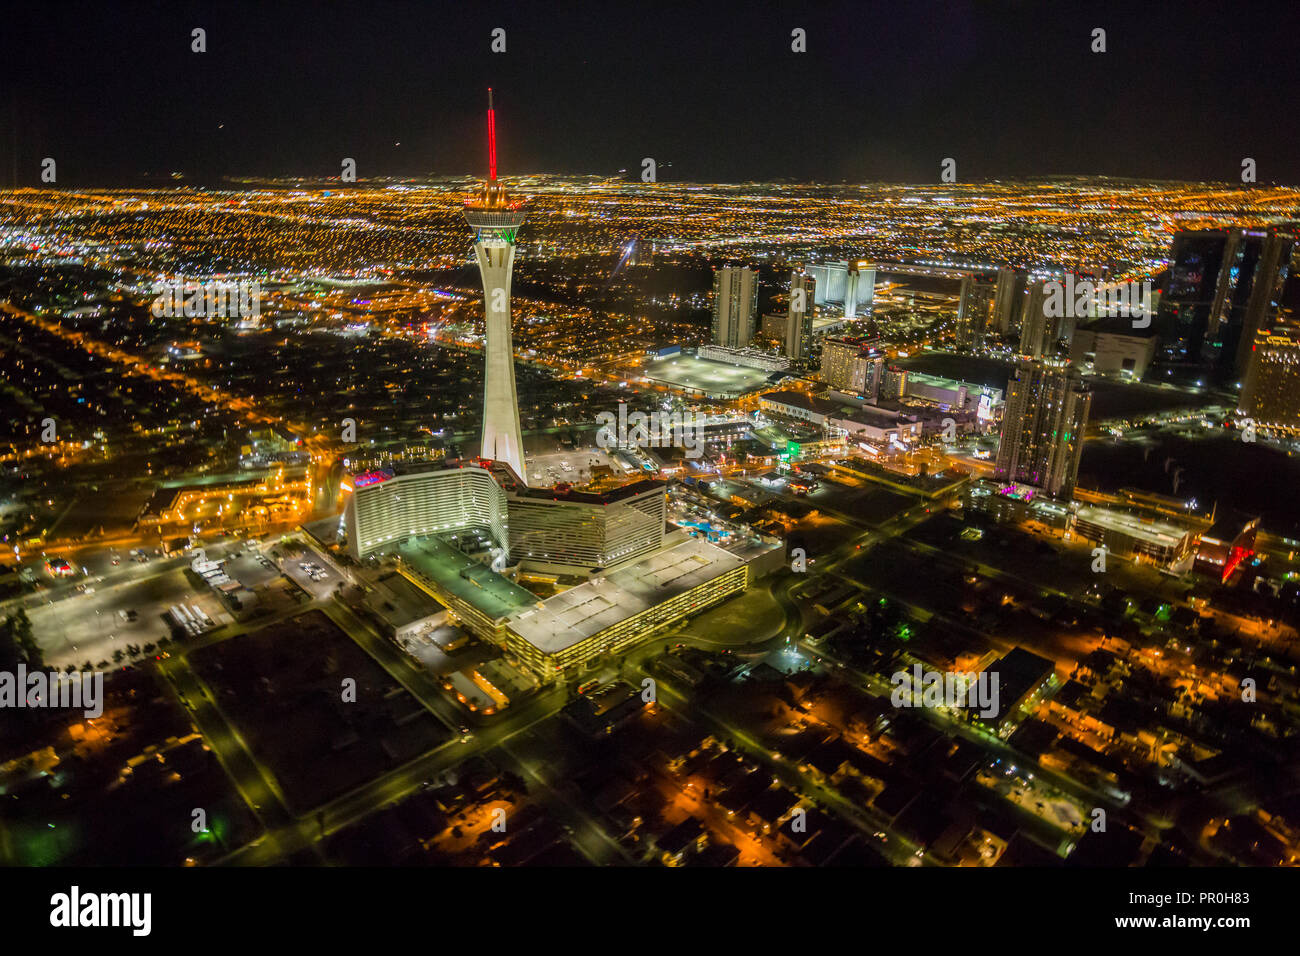 View of Las Vegas and Stratosphere Tower from helicopter at night, Las Vegas, Nevada, United States of America, North America Stock Photo